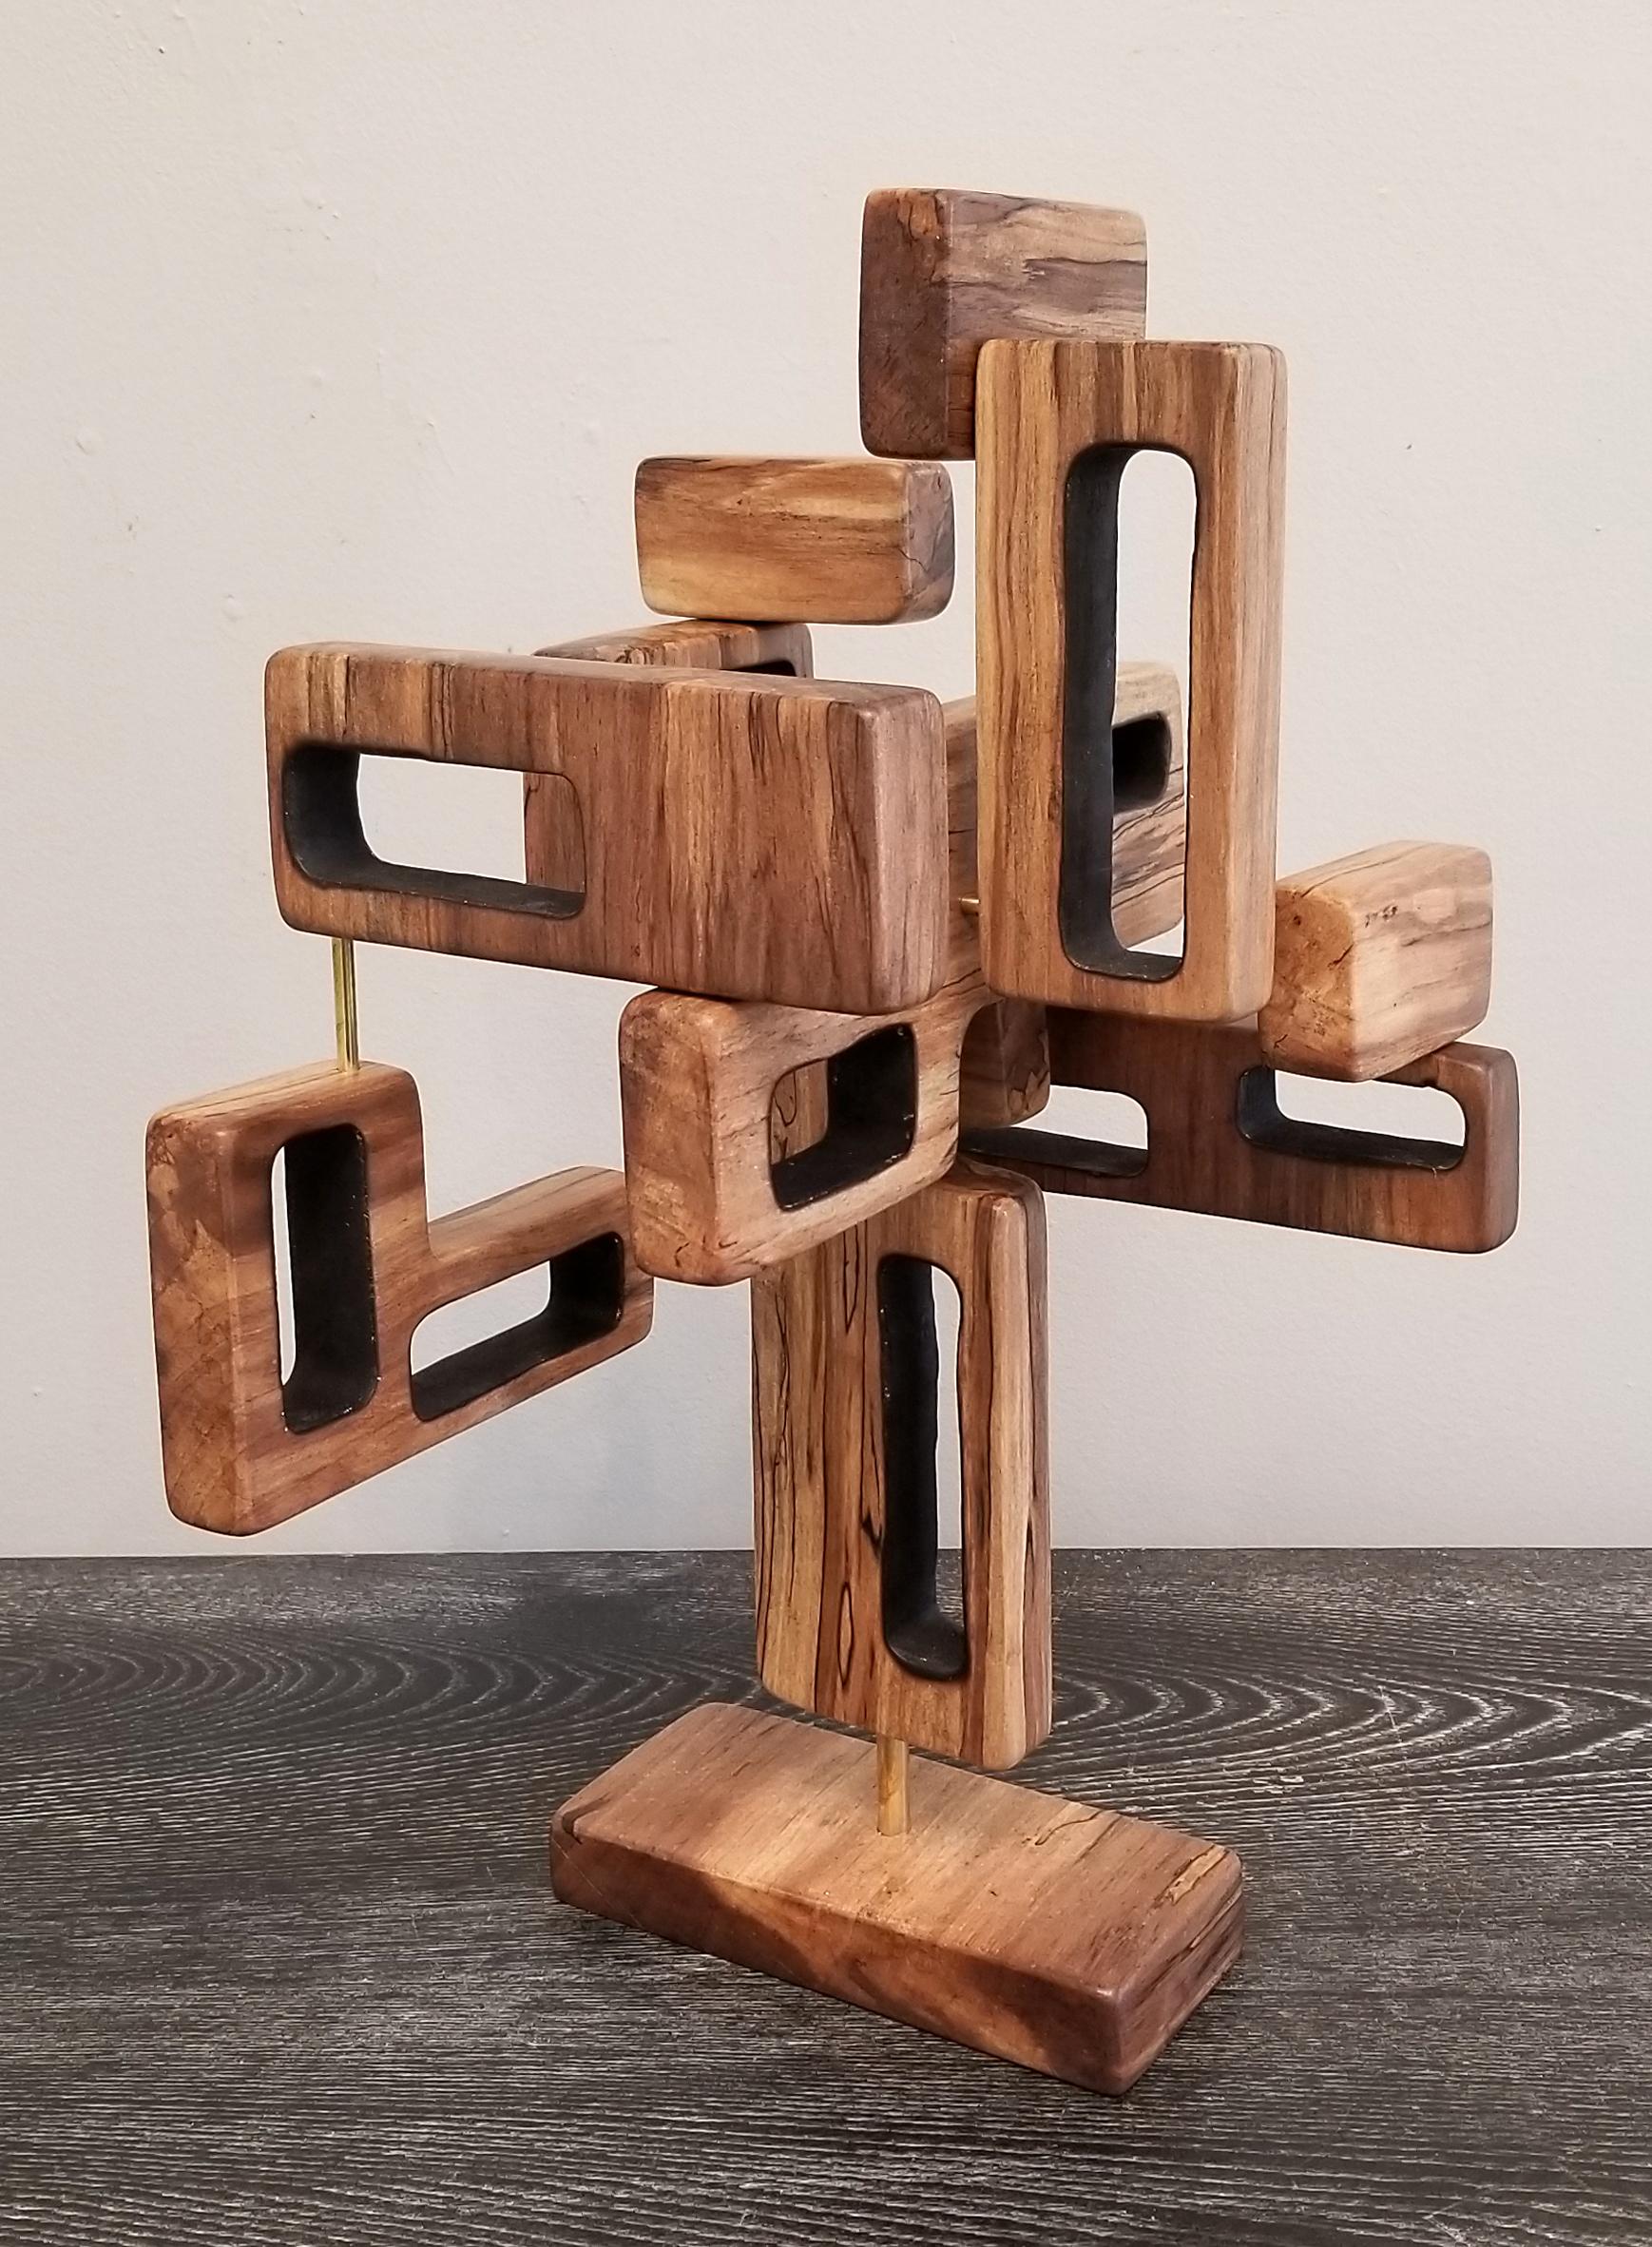 Expression In Wood #15 - Mixed Media Art by Kelsey Green